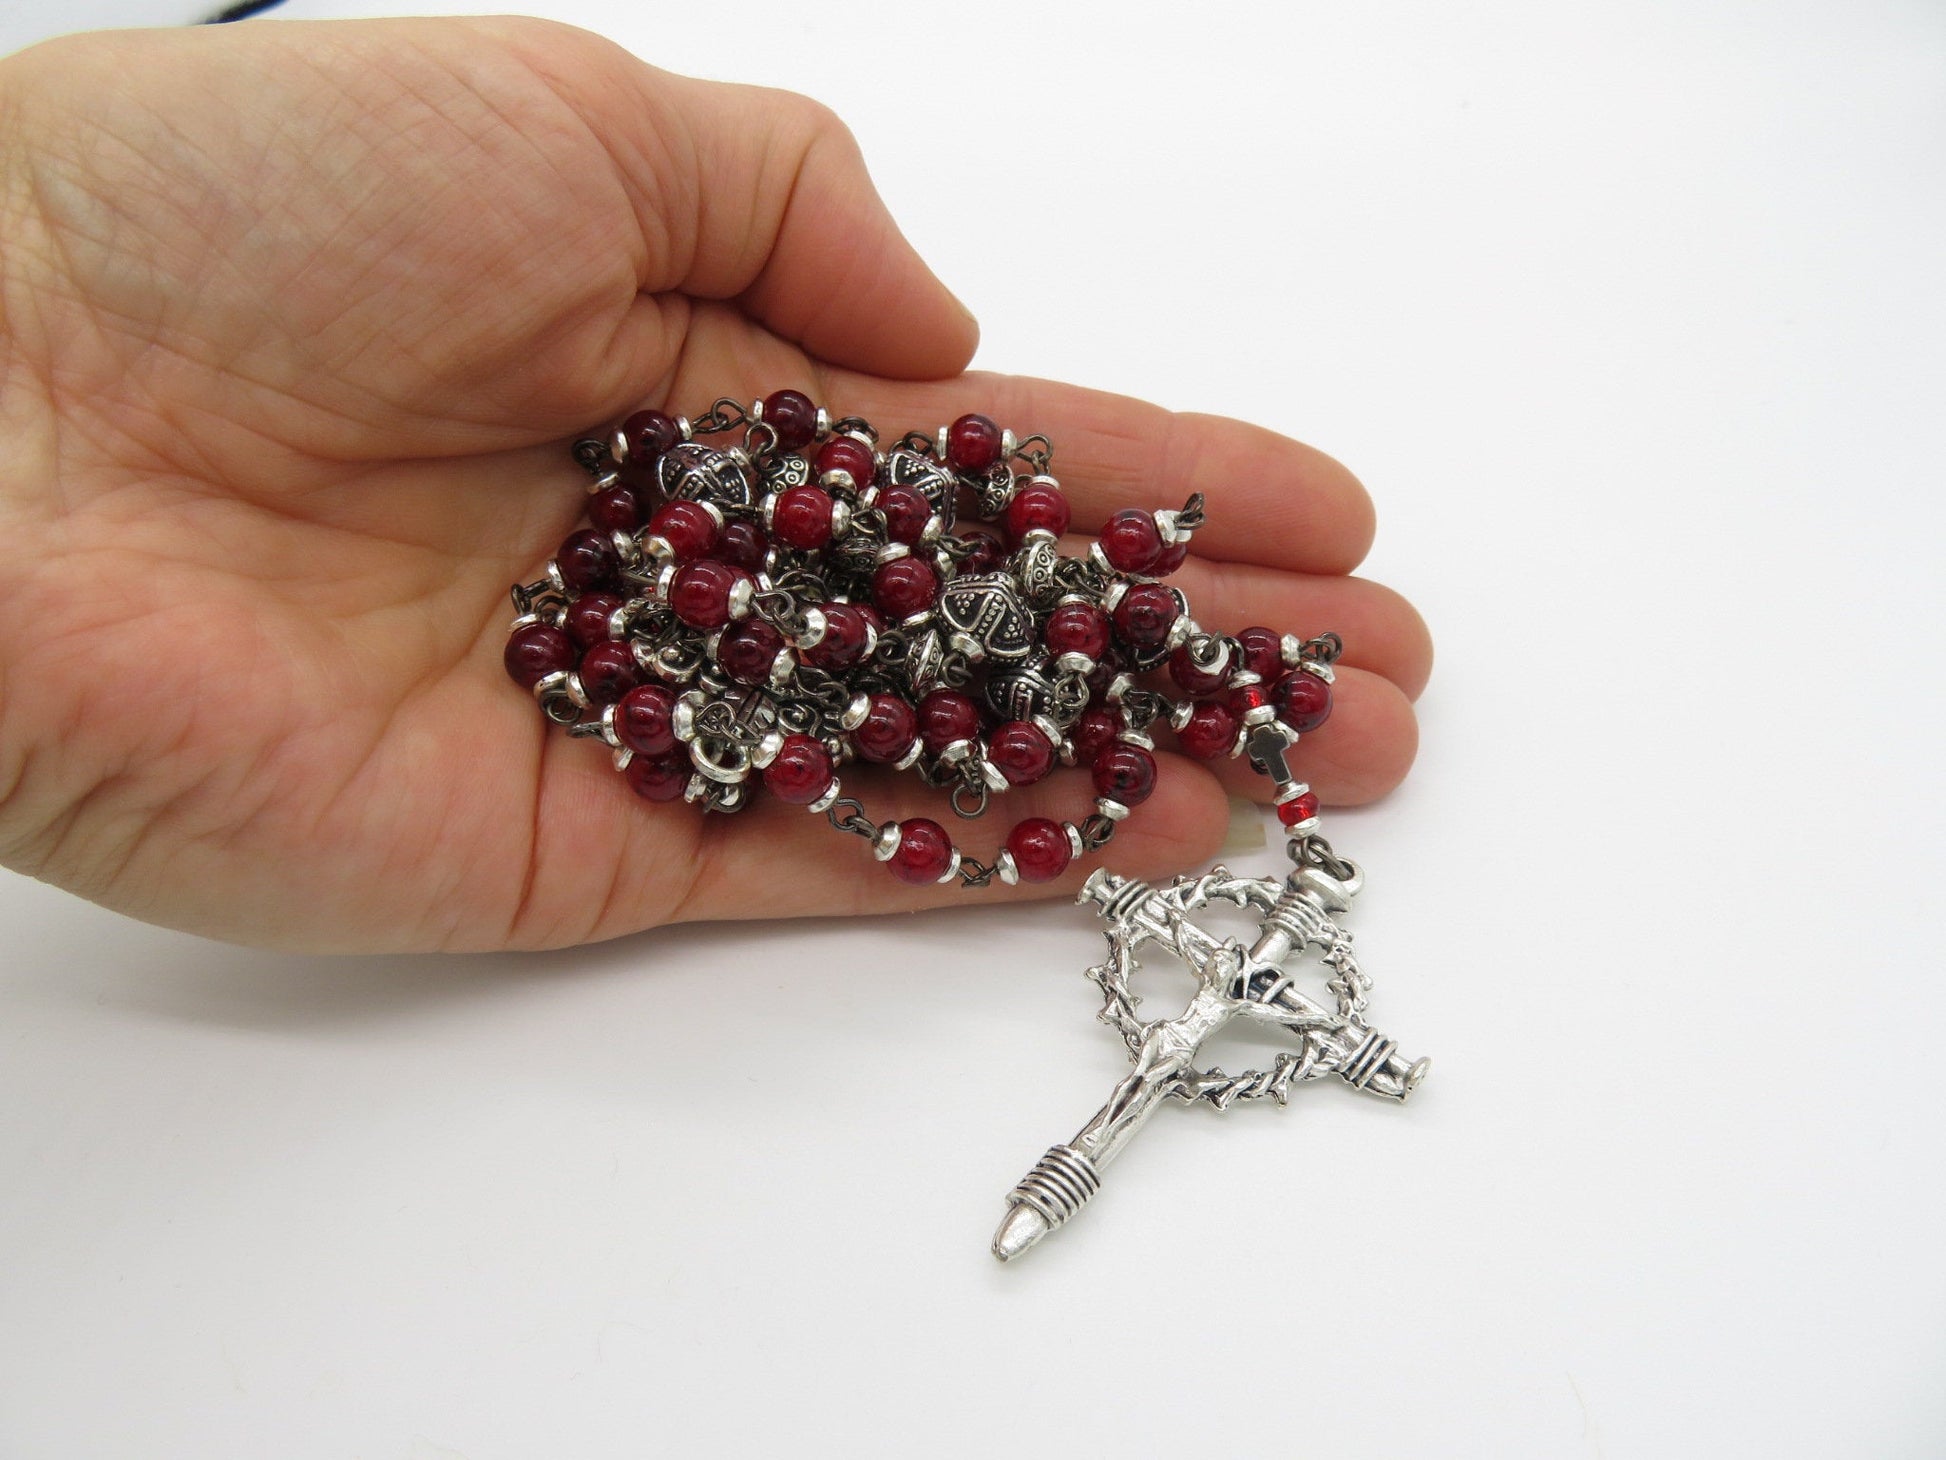 Crowning with Thorns unique rosary beads with deep red glass and silver beads, silver nail crucifix and picture centre medal.